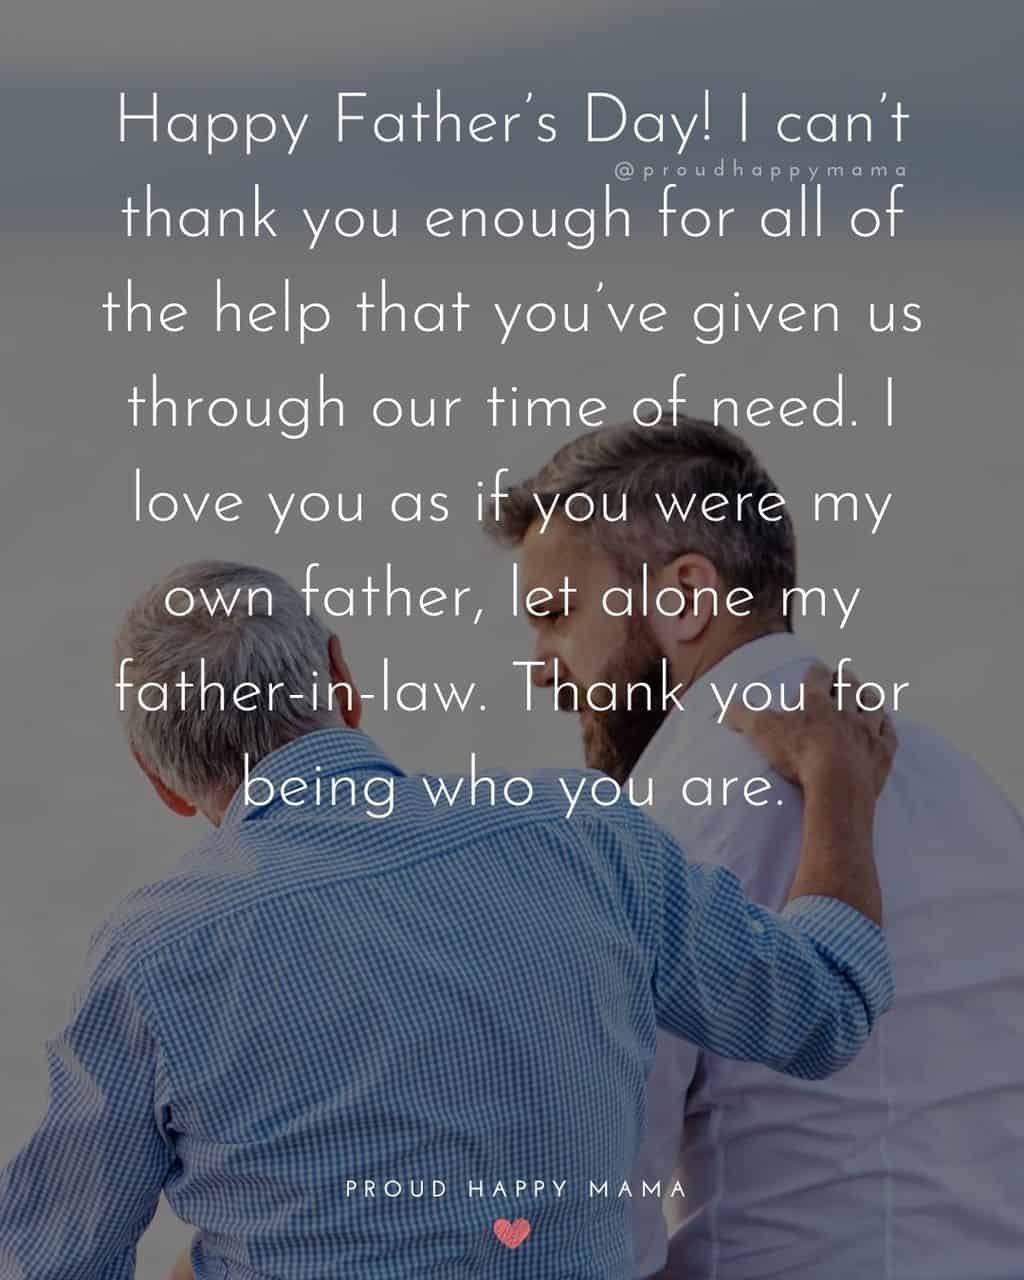 Happy Fathers Day Quotes For Father In Law - Happy Father’s Day! I can’t thank you enough for all of the help that you’ve